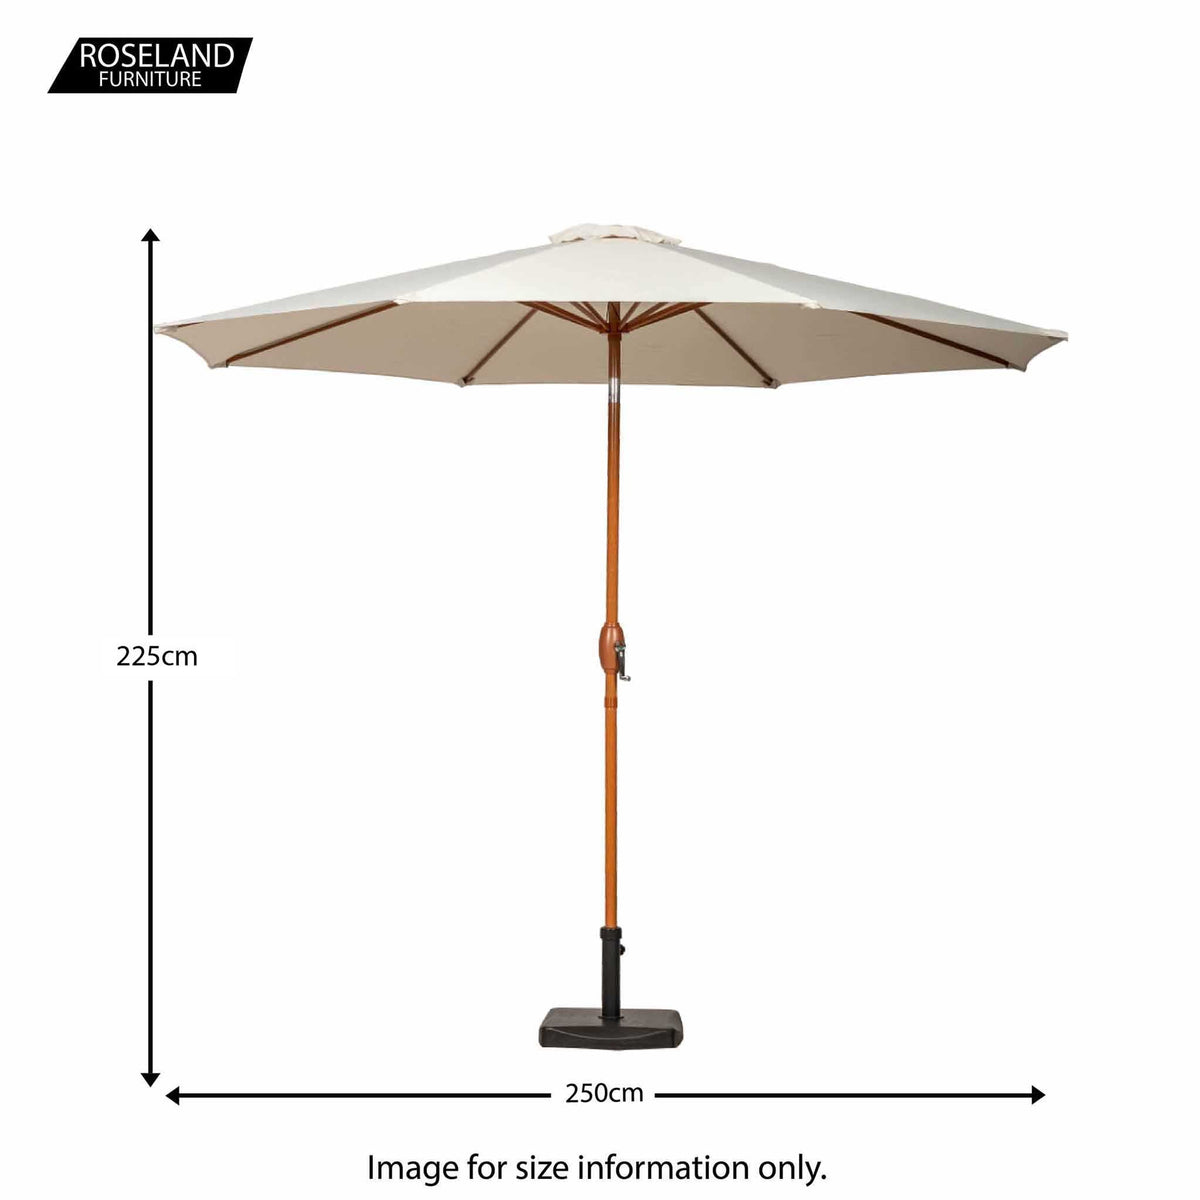 2.5m Ivory Garden Parasol with wood look aluminium frame - Size Guide